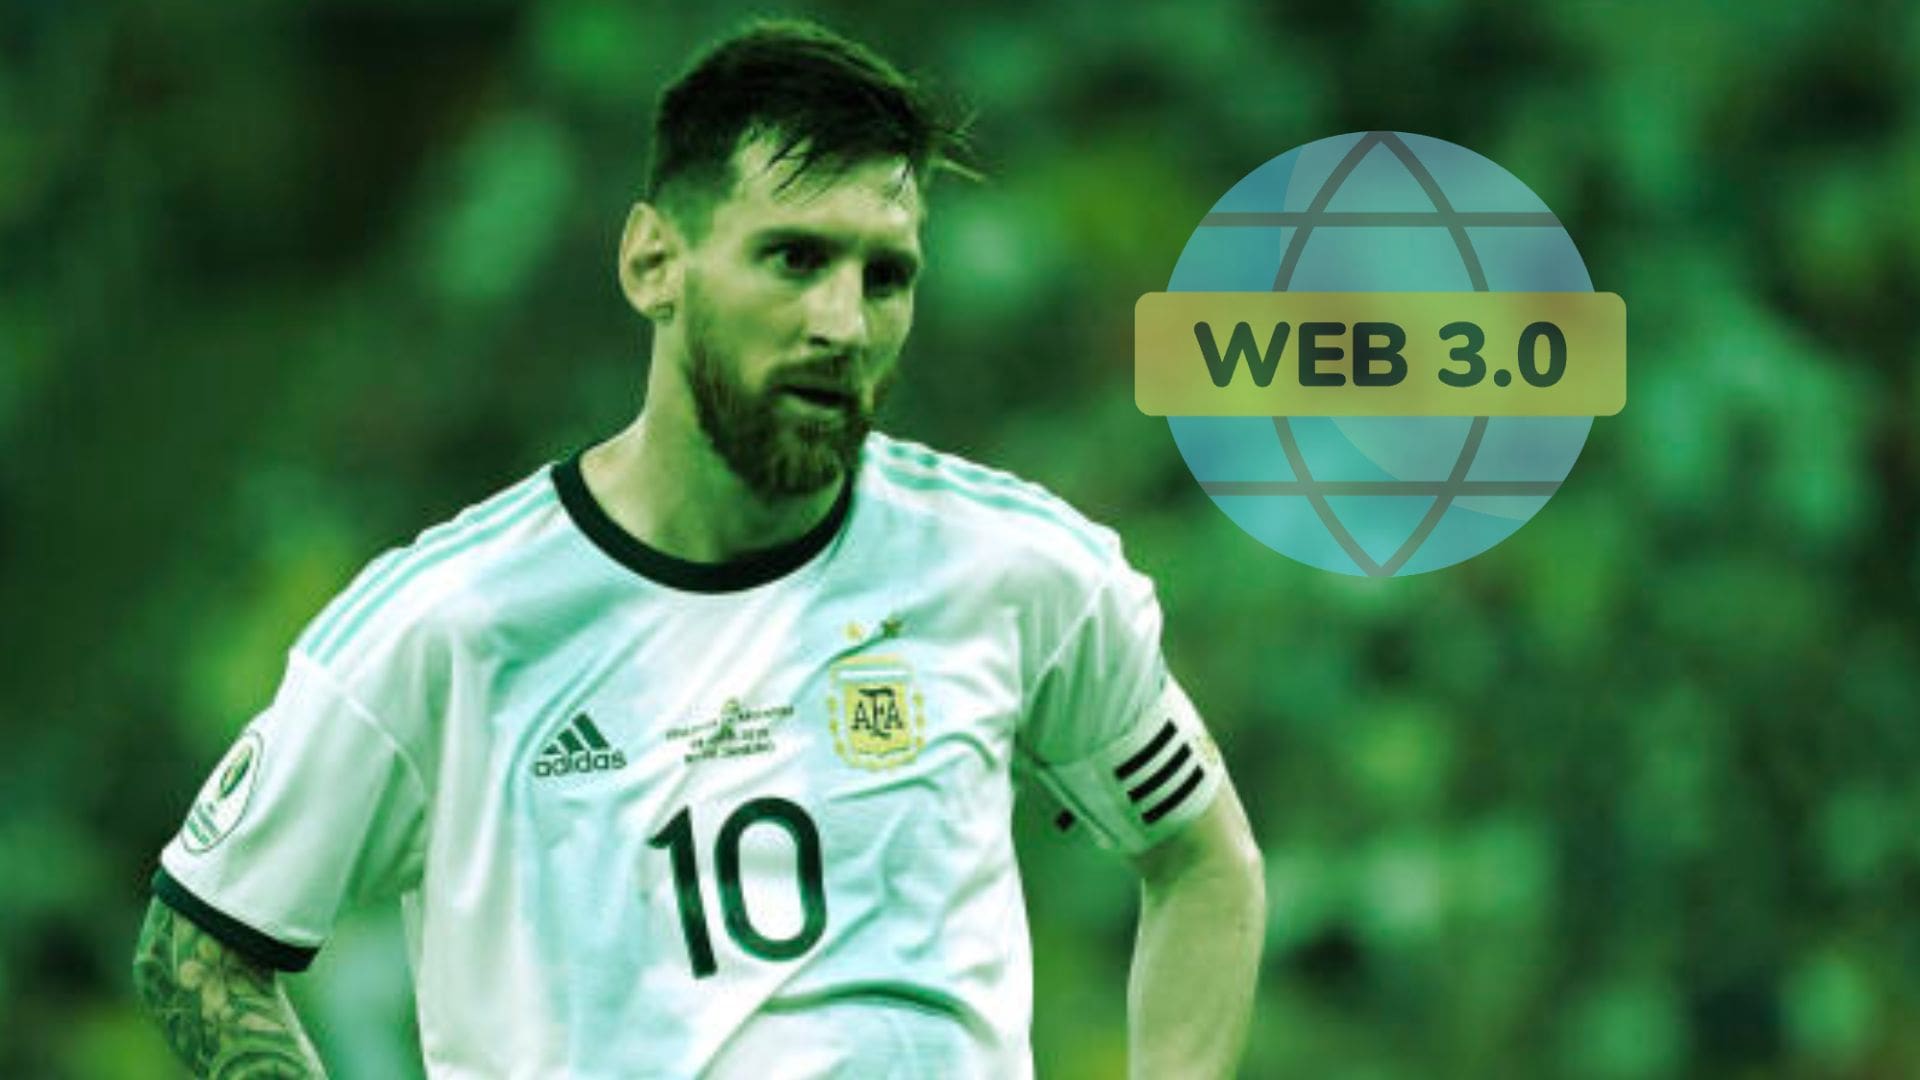 Lionel Messi Invests in $21M Seed Round of Web3 Startup Matchday